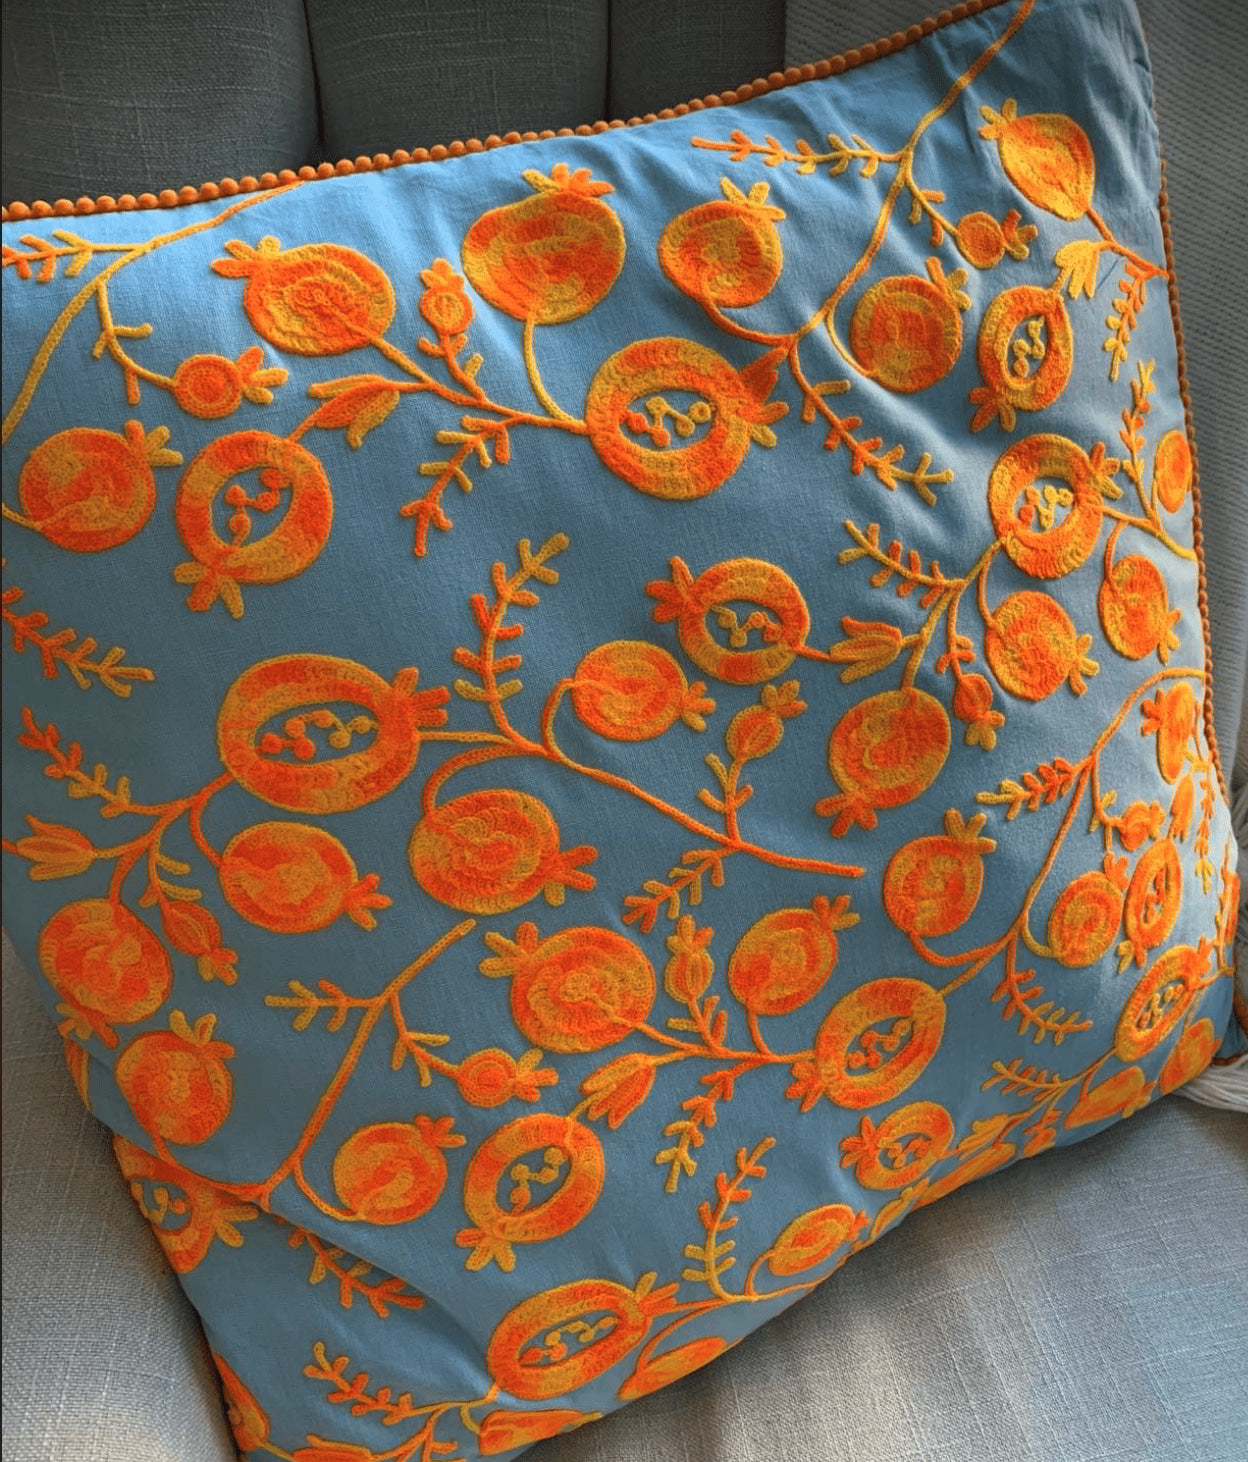 Ruby Traders Pomegranate Cushion - Pale Blue / Orange embroidered pillow.